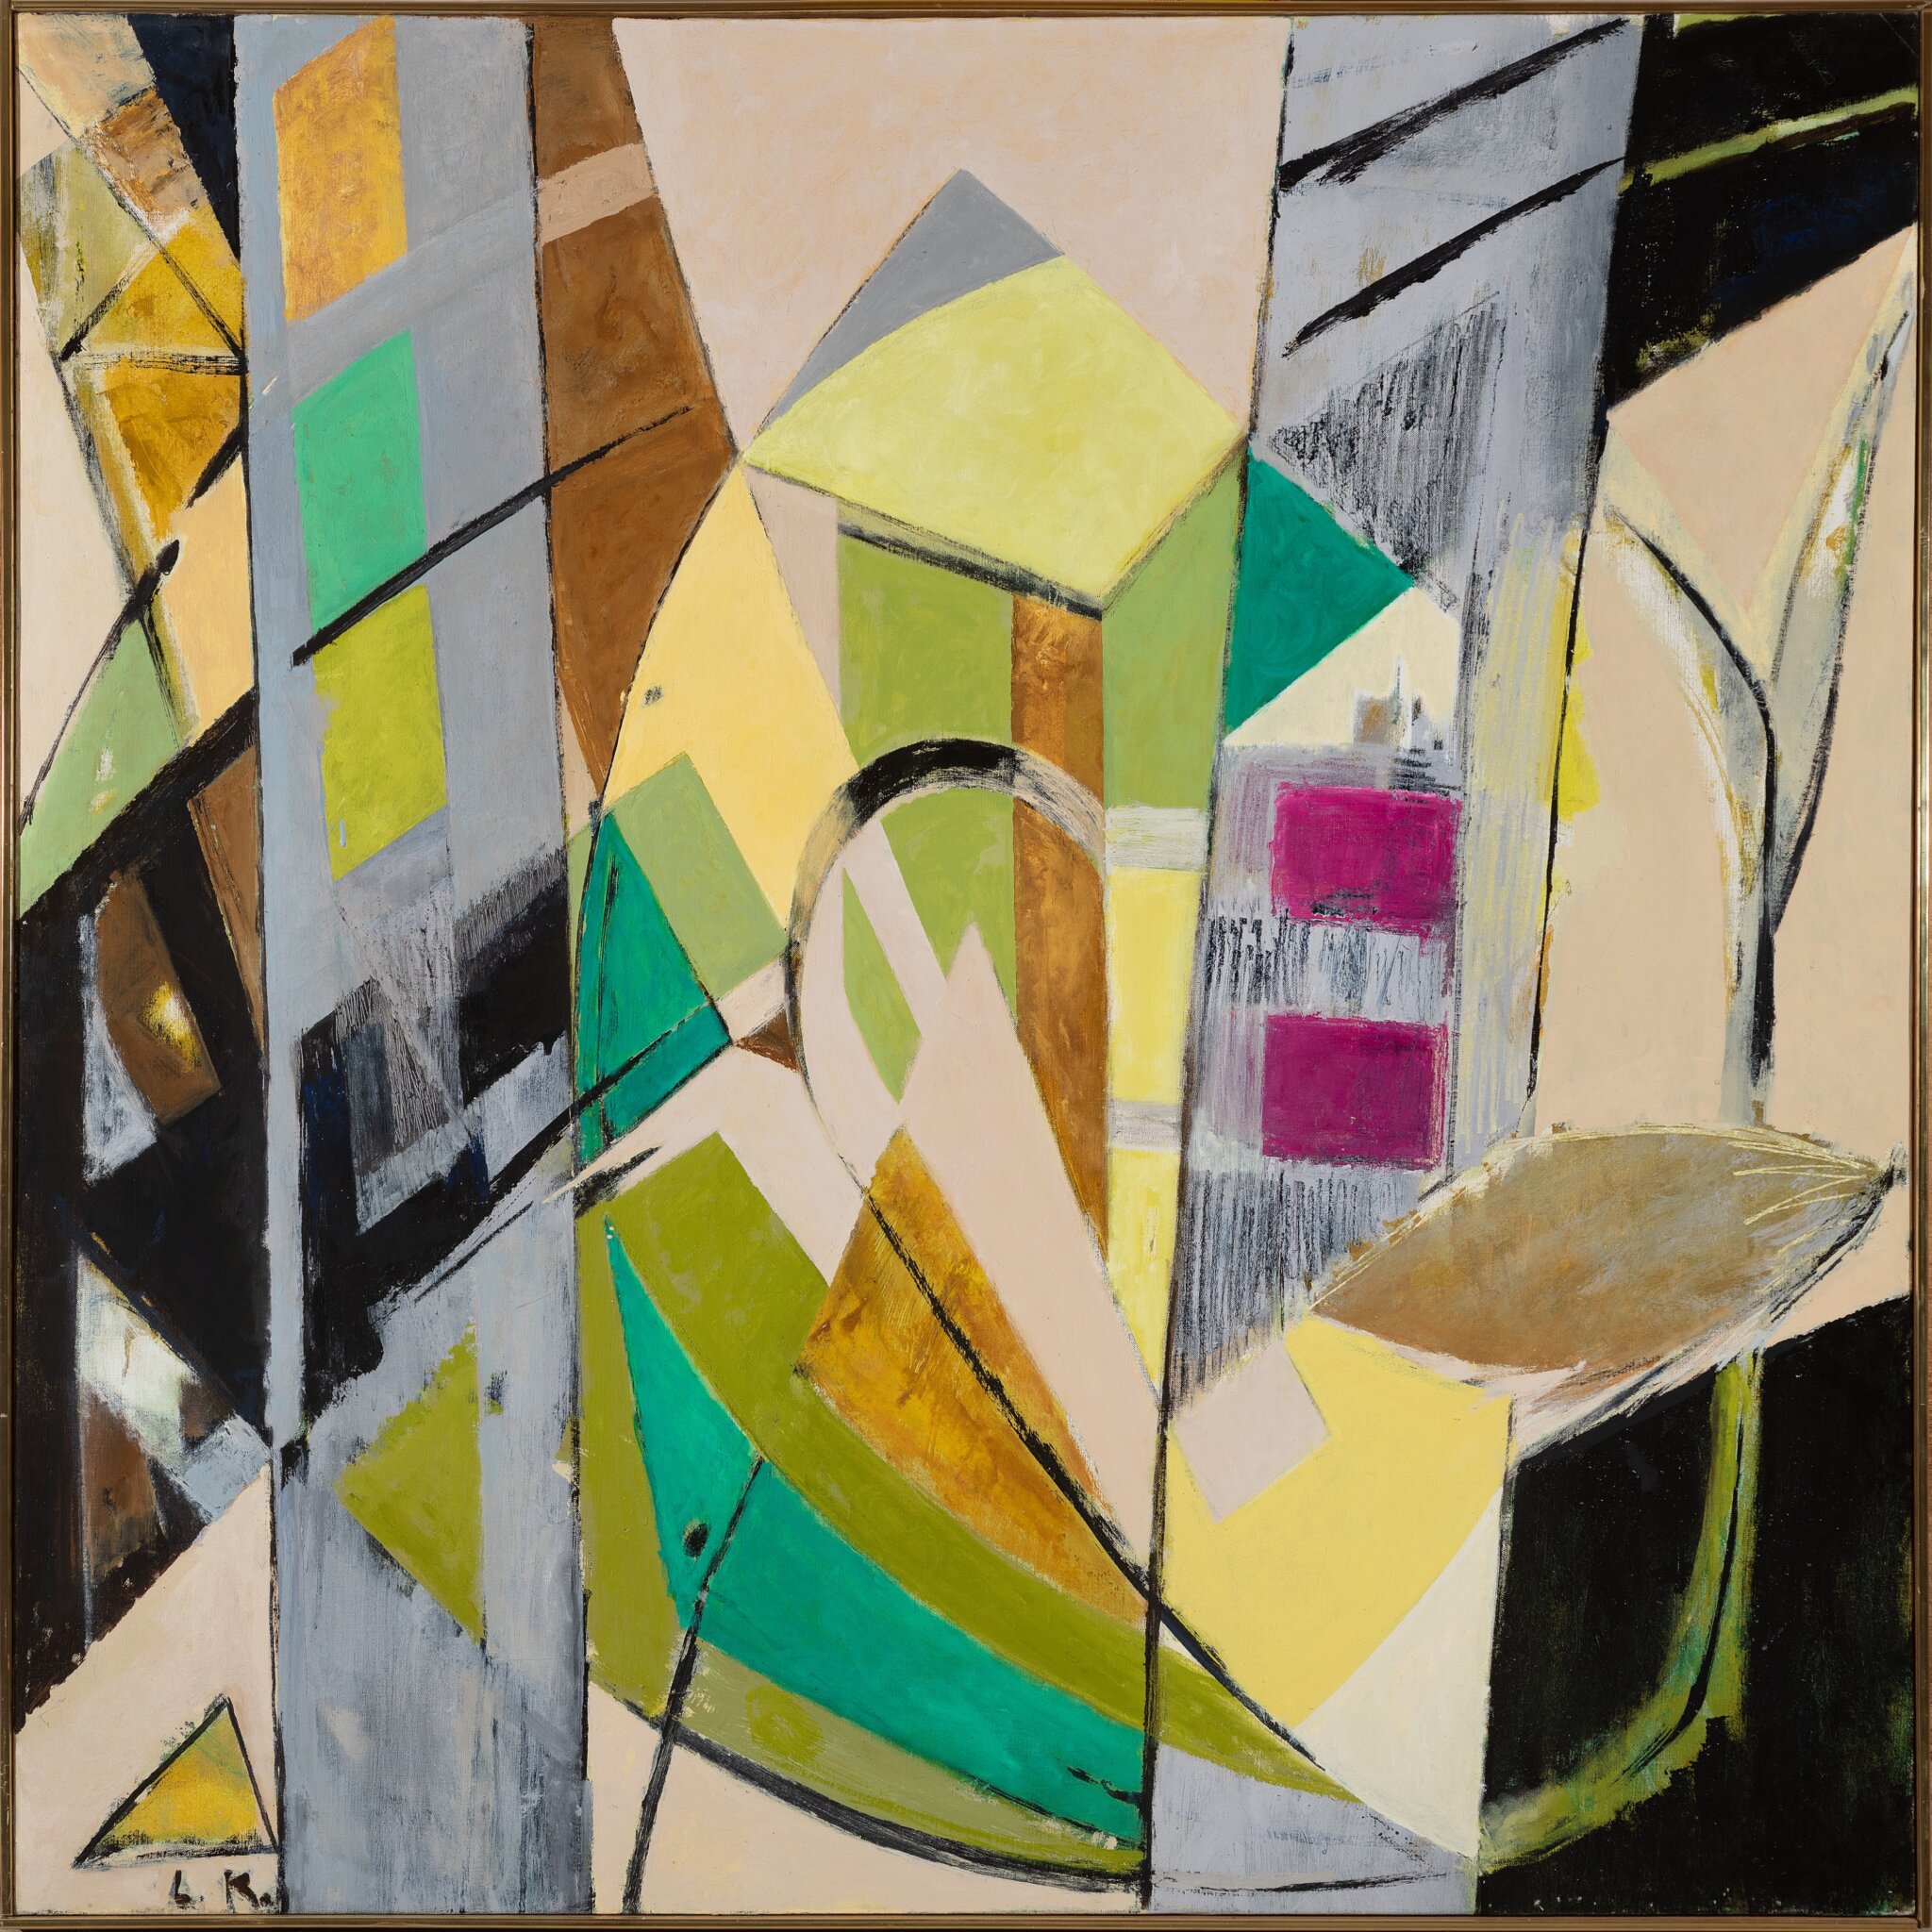 Lee Krasner's "Offbeat" (1956, oil on canvas) - Abstract Expressionism